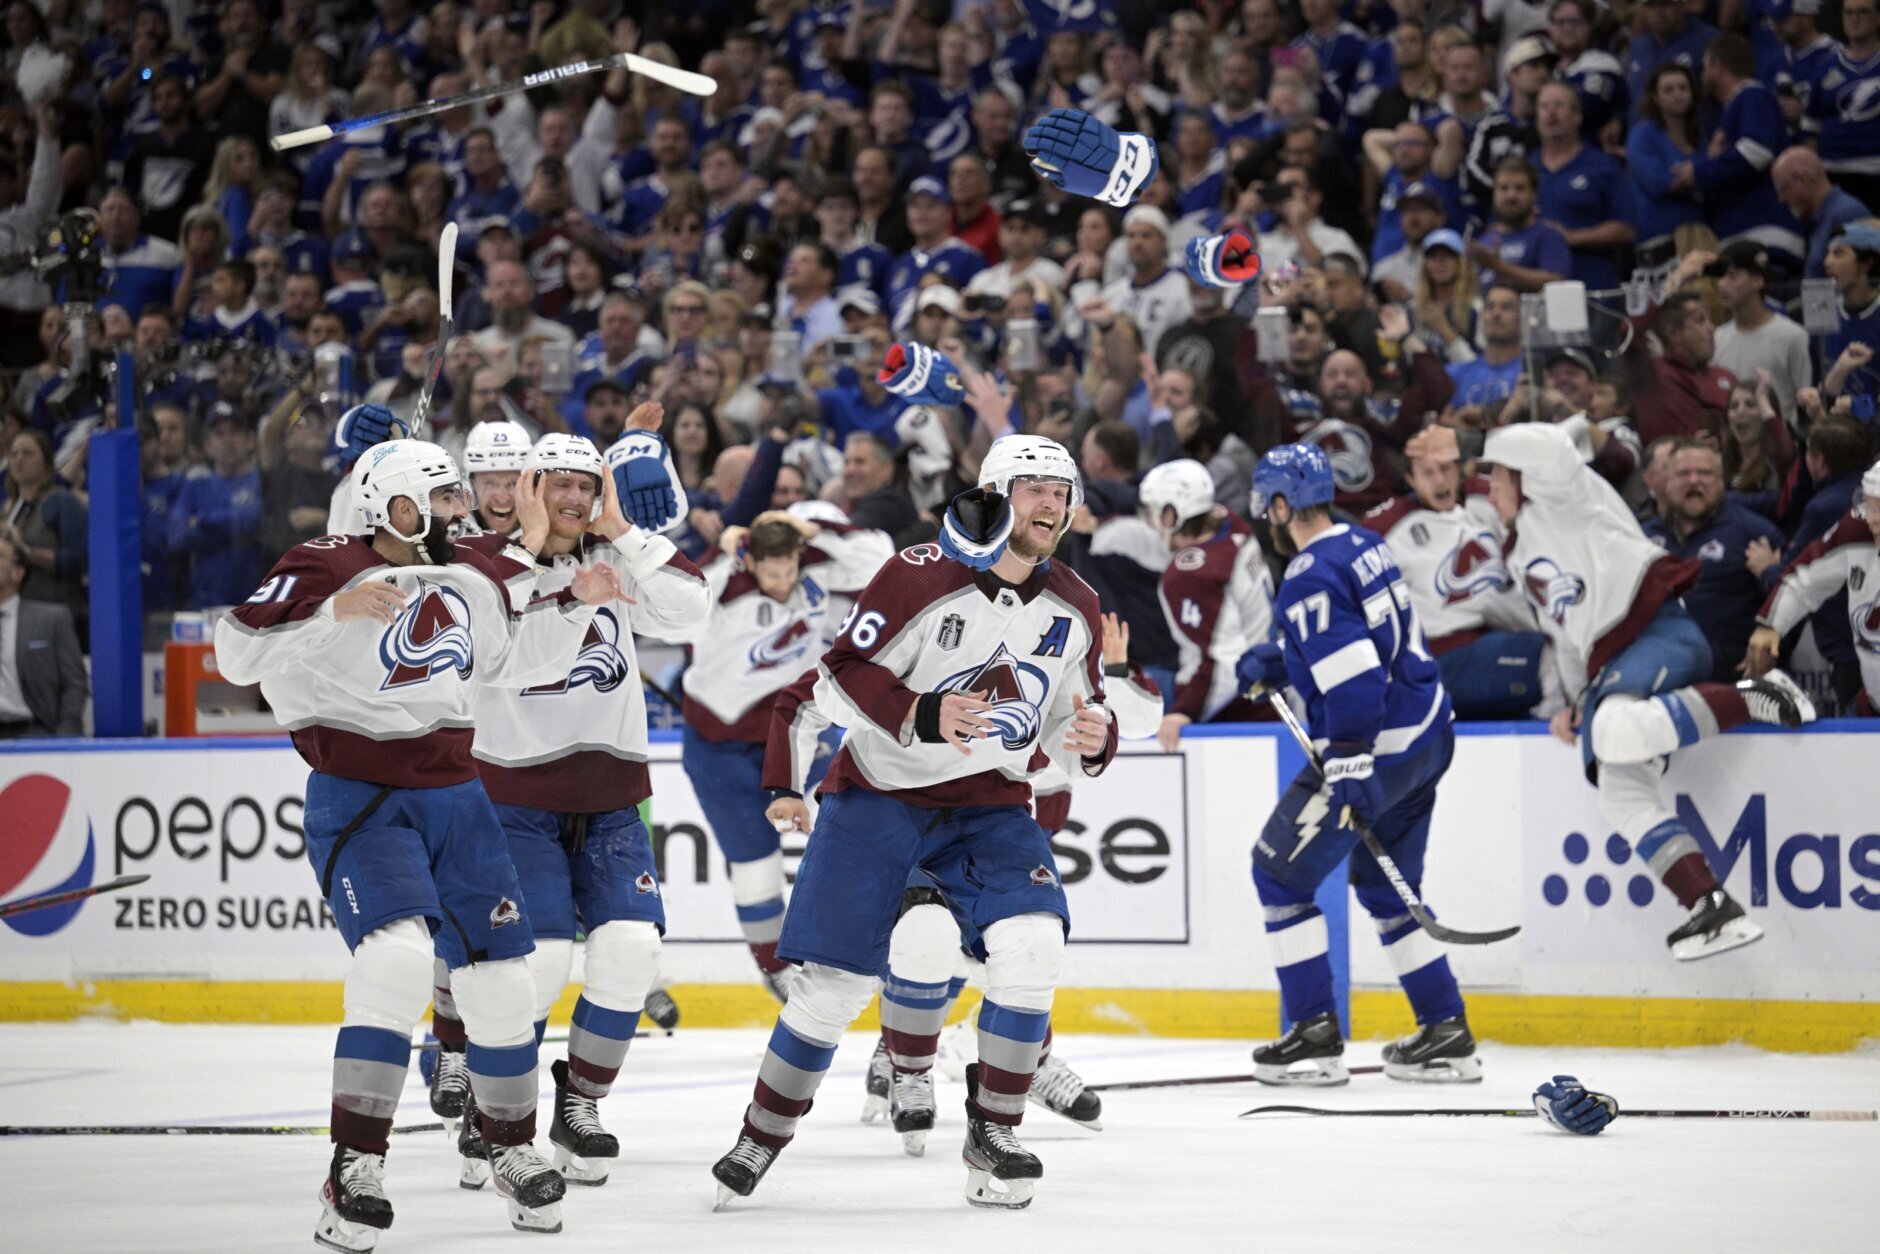 https://wtop.com/wp-content/uploads/2022/06/Stanley_Cup_Avalanche_Lightning_Hockey_20202-1880x1254.jpg